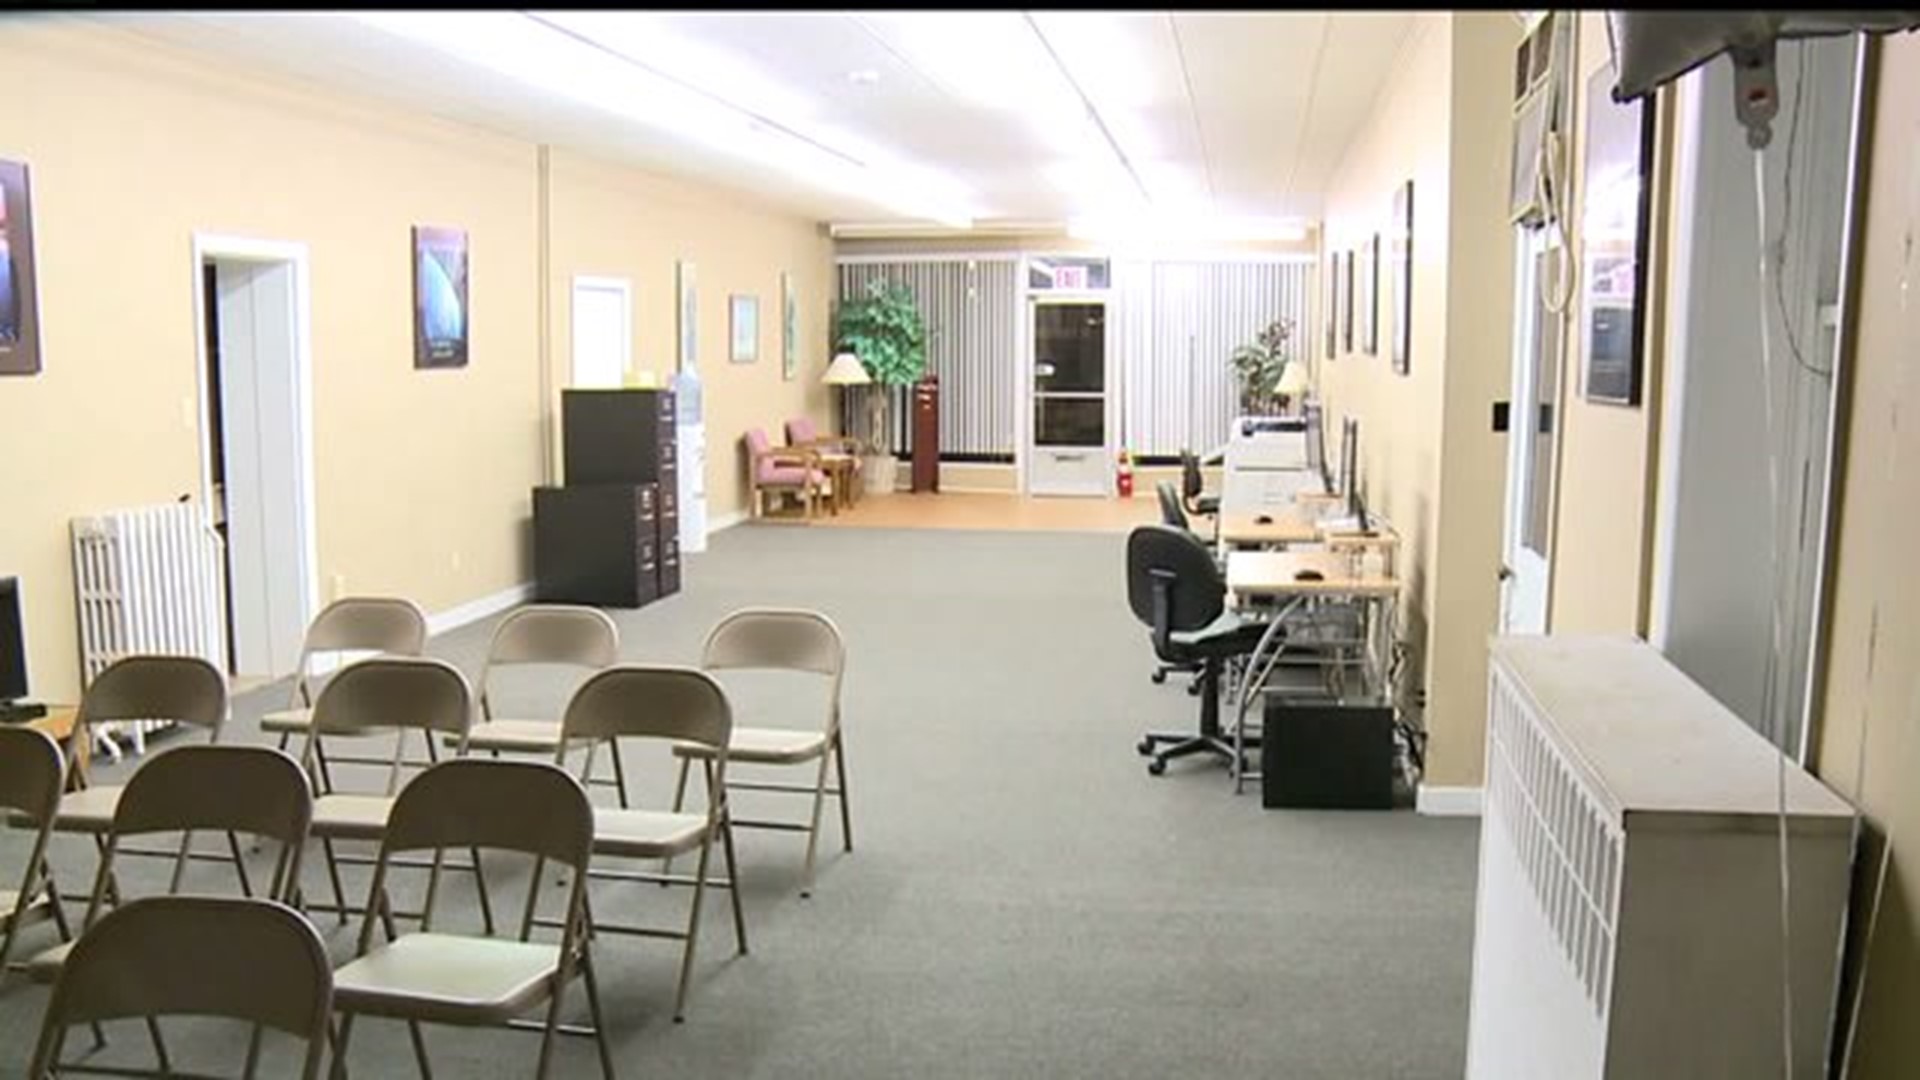 Recovering addict opens recovery center